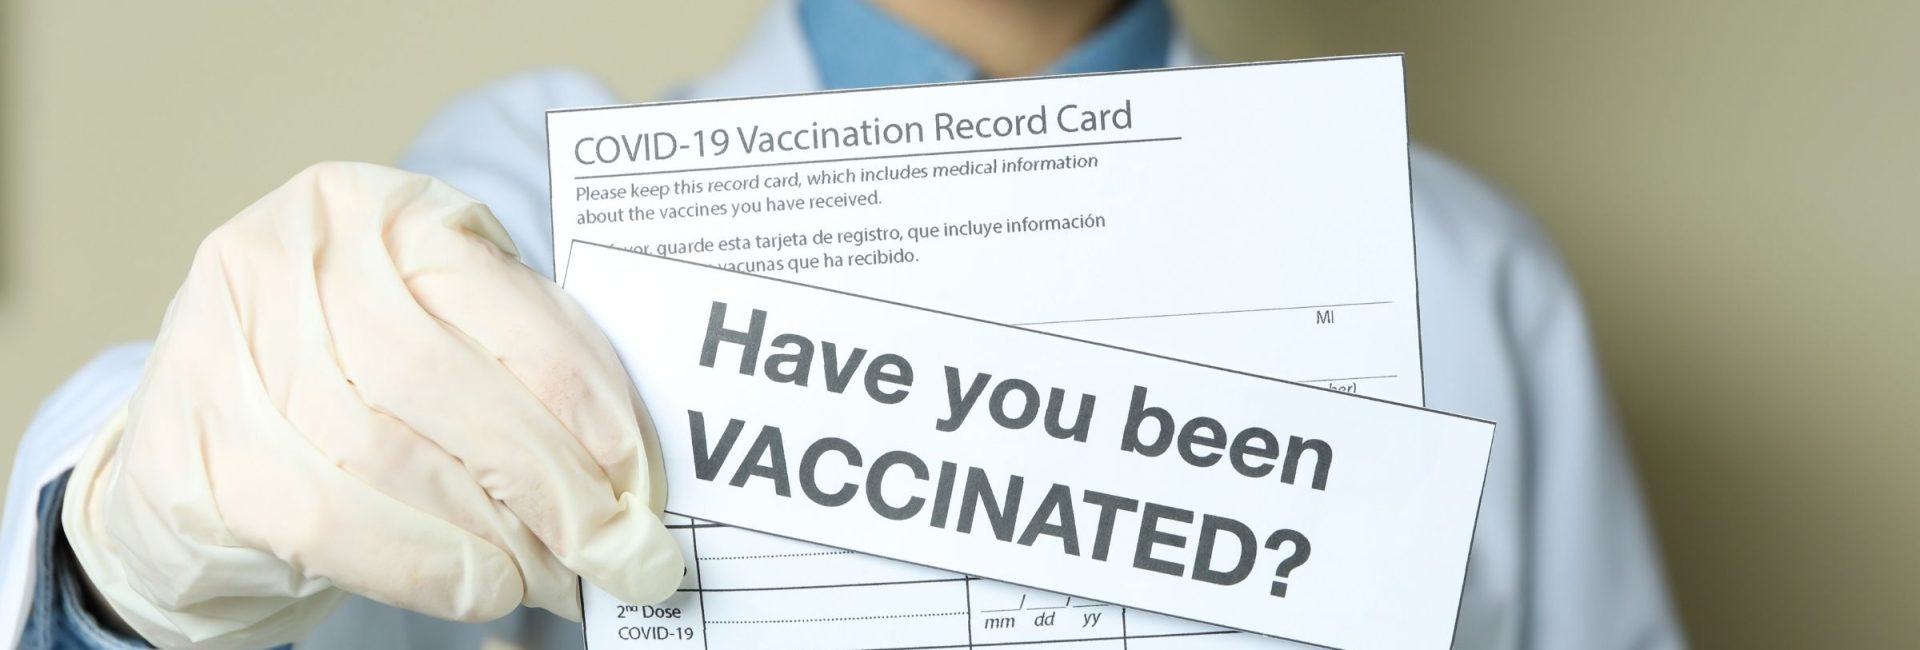 vaccine card held by doctor with "have you been vaccinated" picture